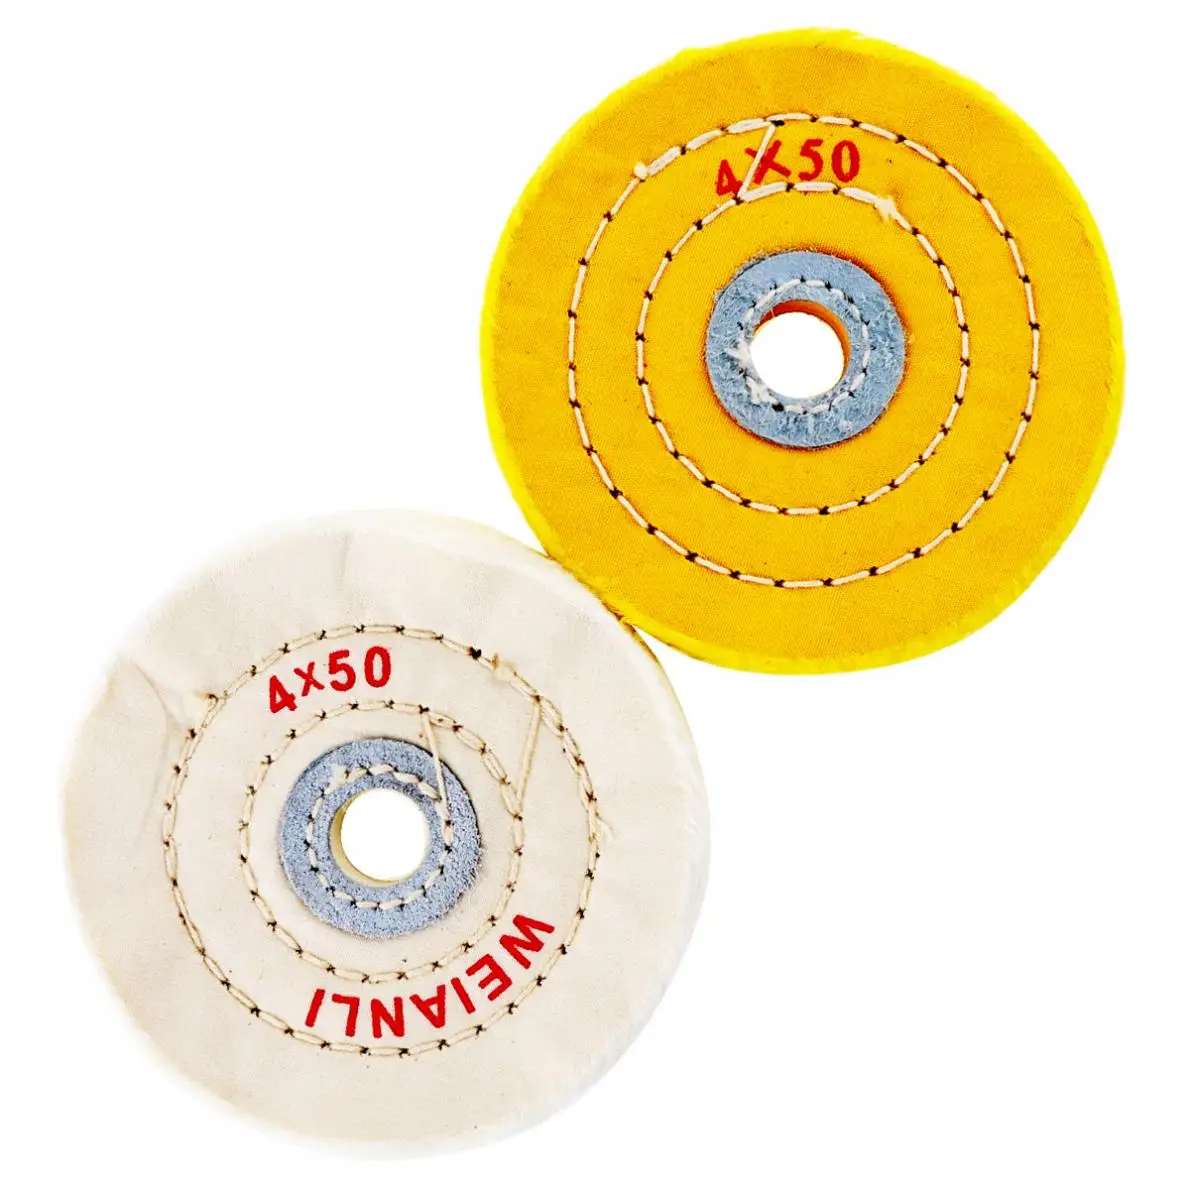 

2pcs 4 Inch Cloth Buffing Polishing Wheel with Hole Diameter and Flannelette Material for Table Type Grinding Machine